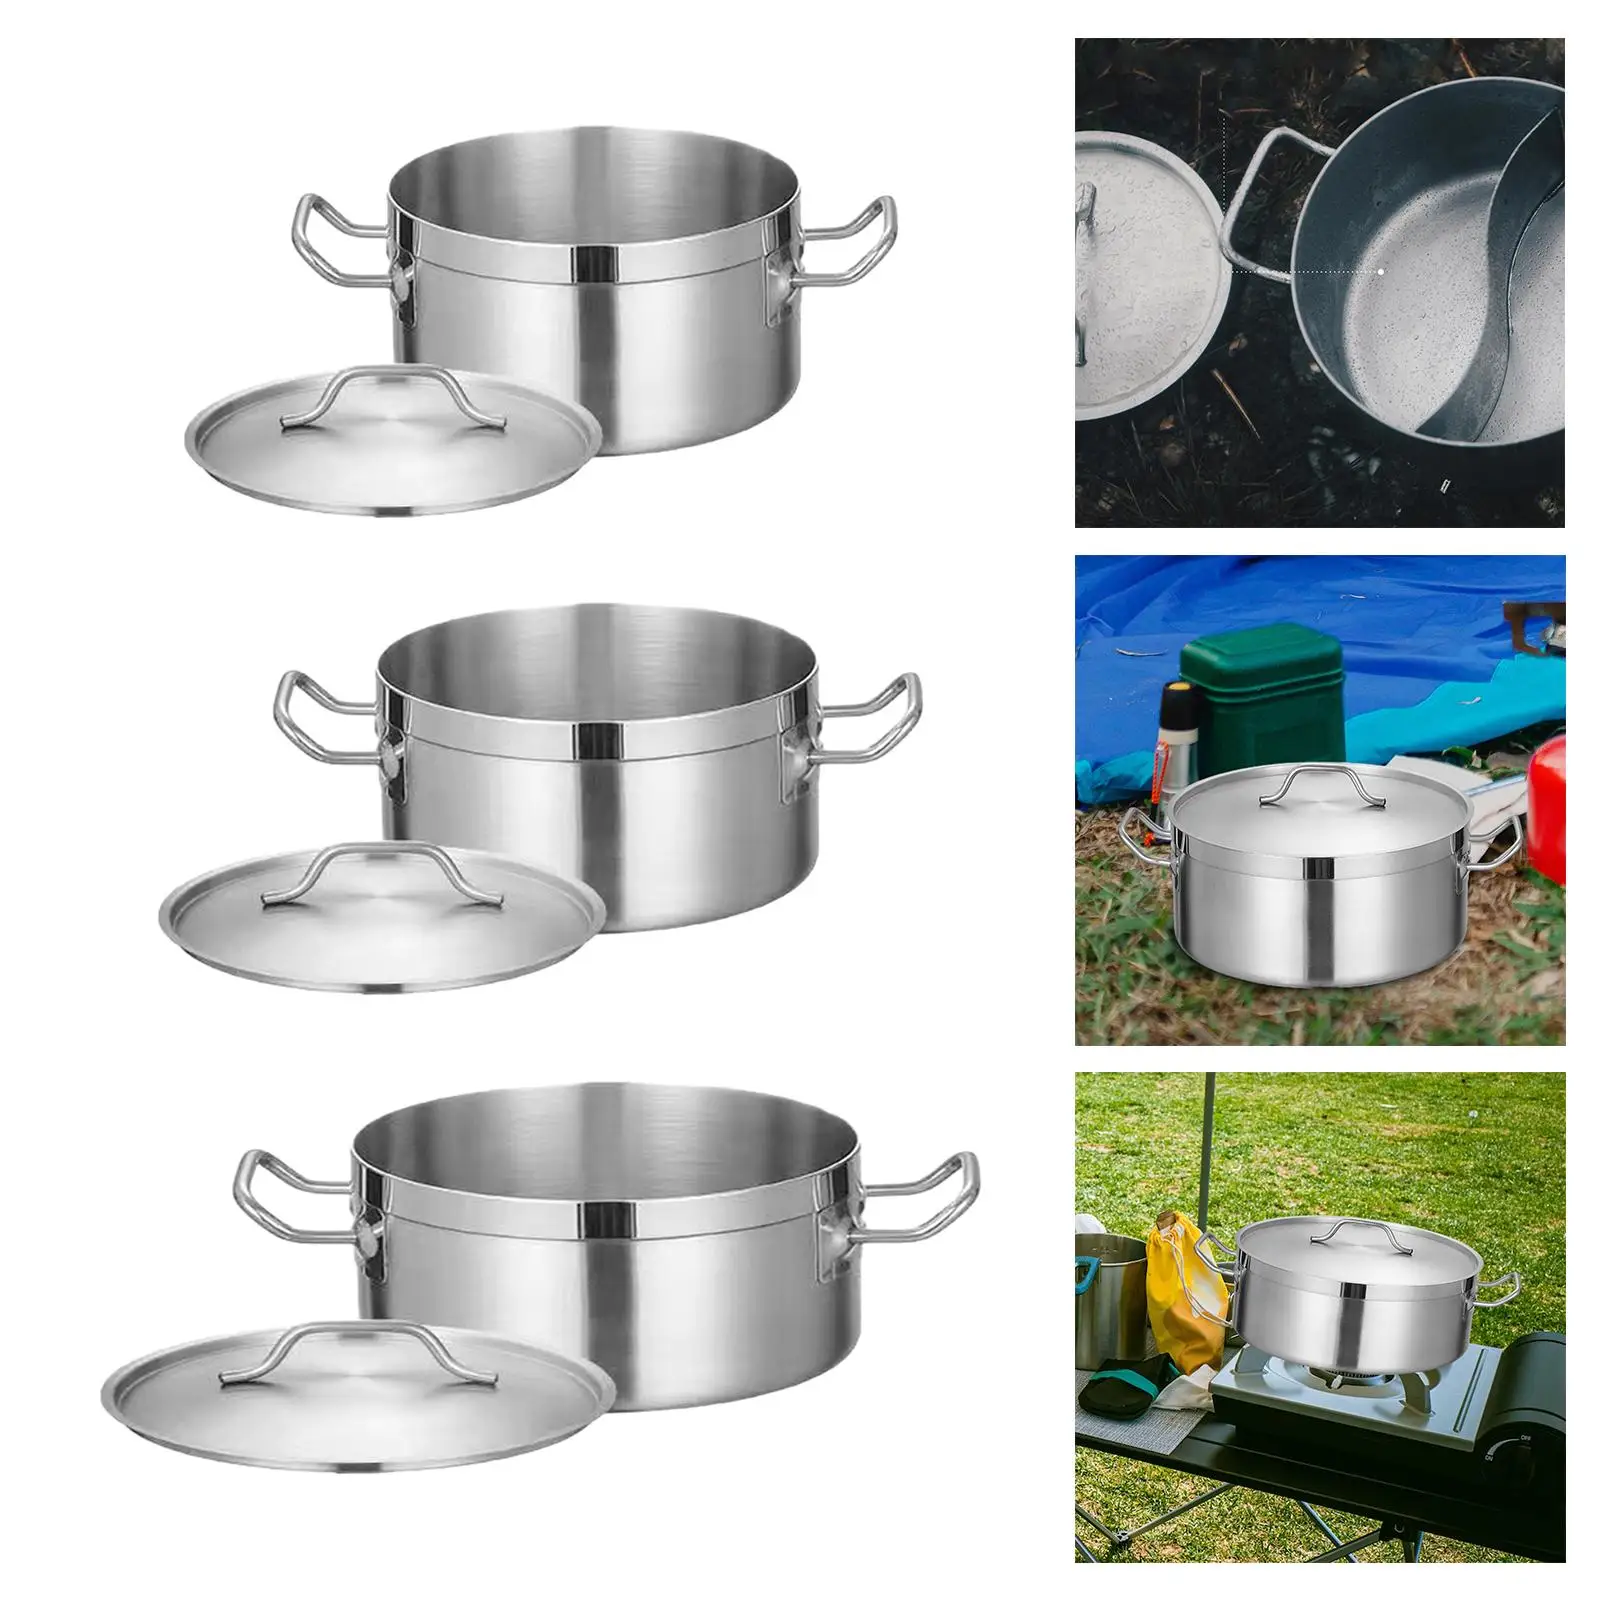 Stainless Steel Stockpot with Lid Heavy Duty Small Double Handles Induction Pot for Commercial Outdoor Kitchen Camping Household